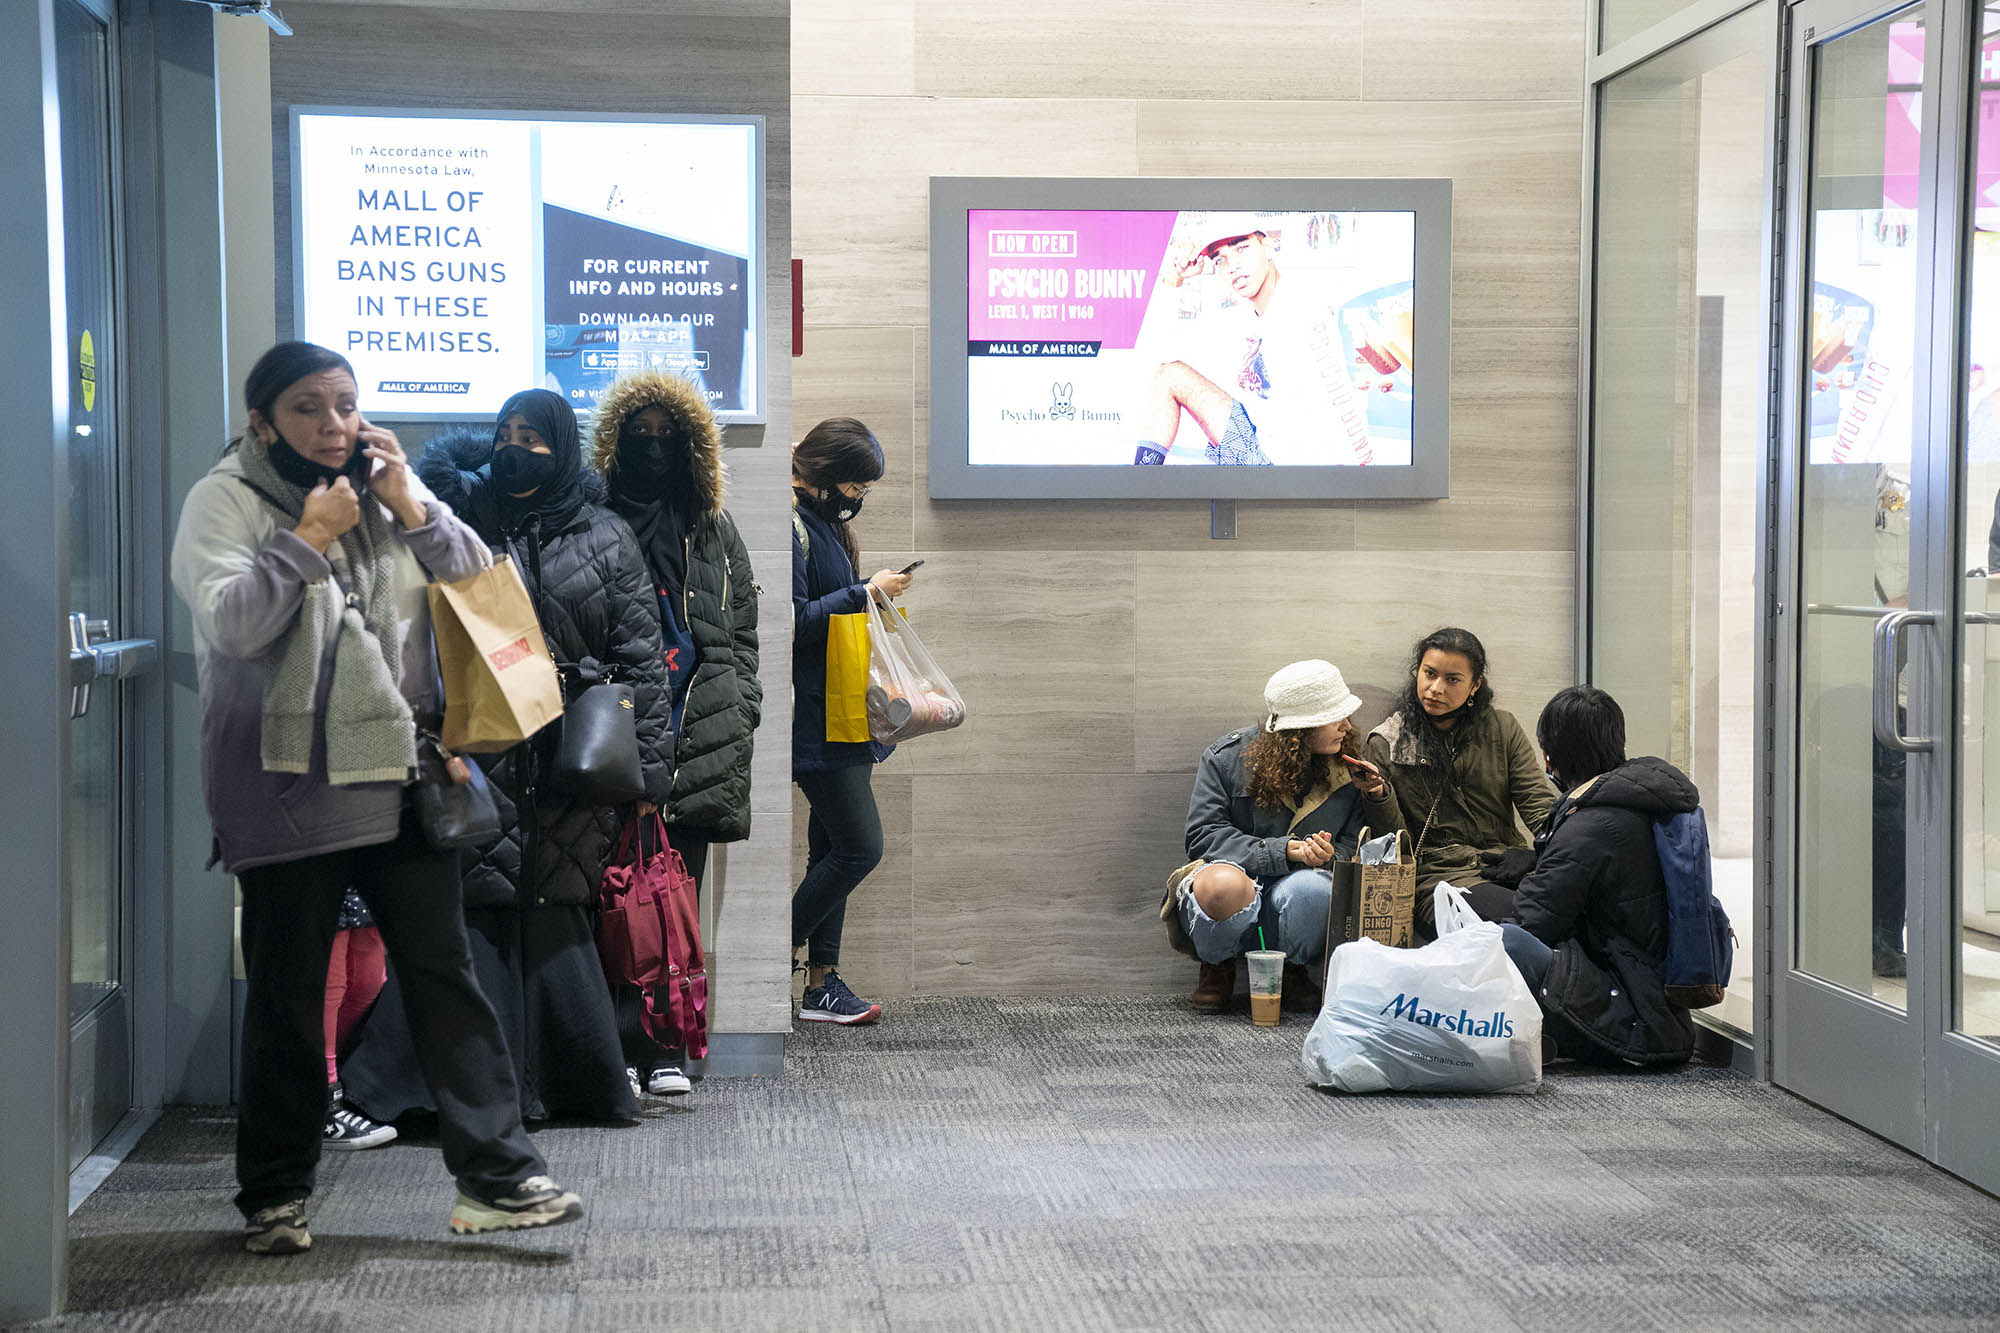 People wait near an exit to be picked up from the Mall of America following a shooting, where two people were wounded.